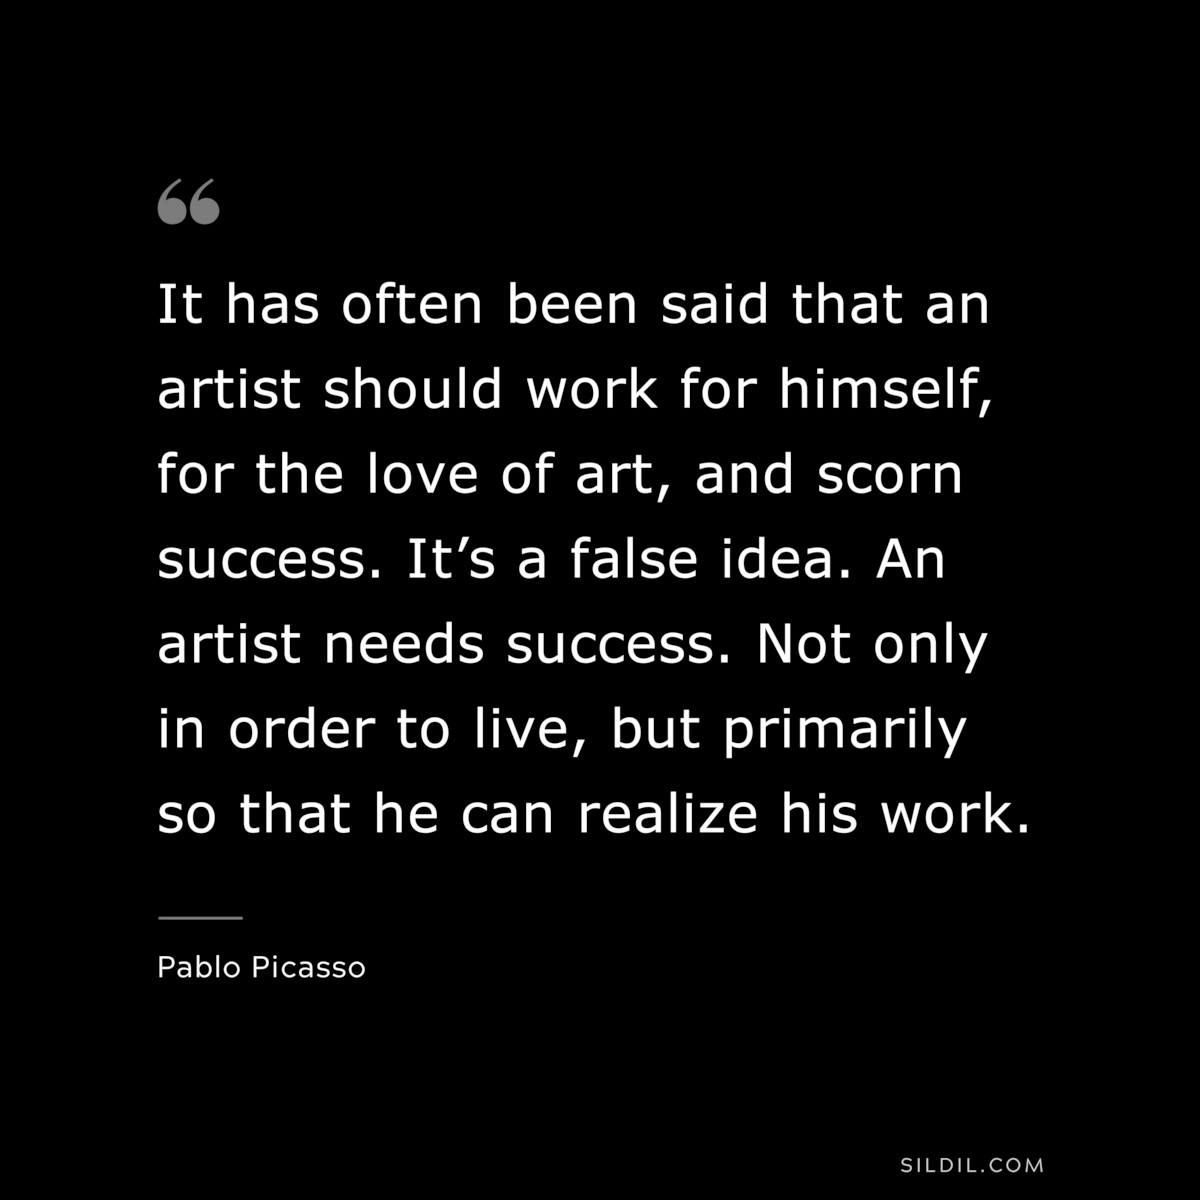 It has often been said that an artist should work for himself, for the love of art, and scorn success. It’s a false idea. An artist needs success. Not only in order to live, but primarily so that he can realize his work. ― Pablo Picasso